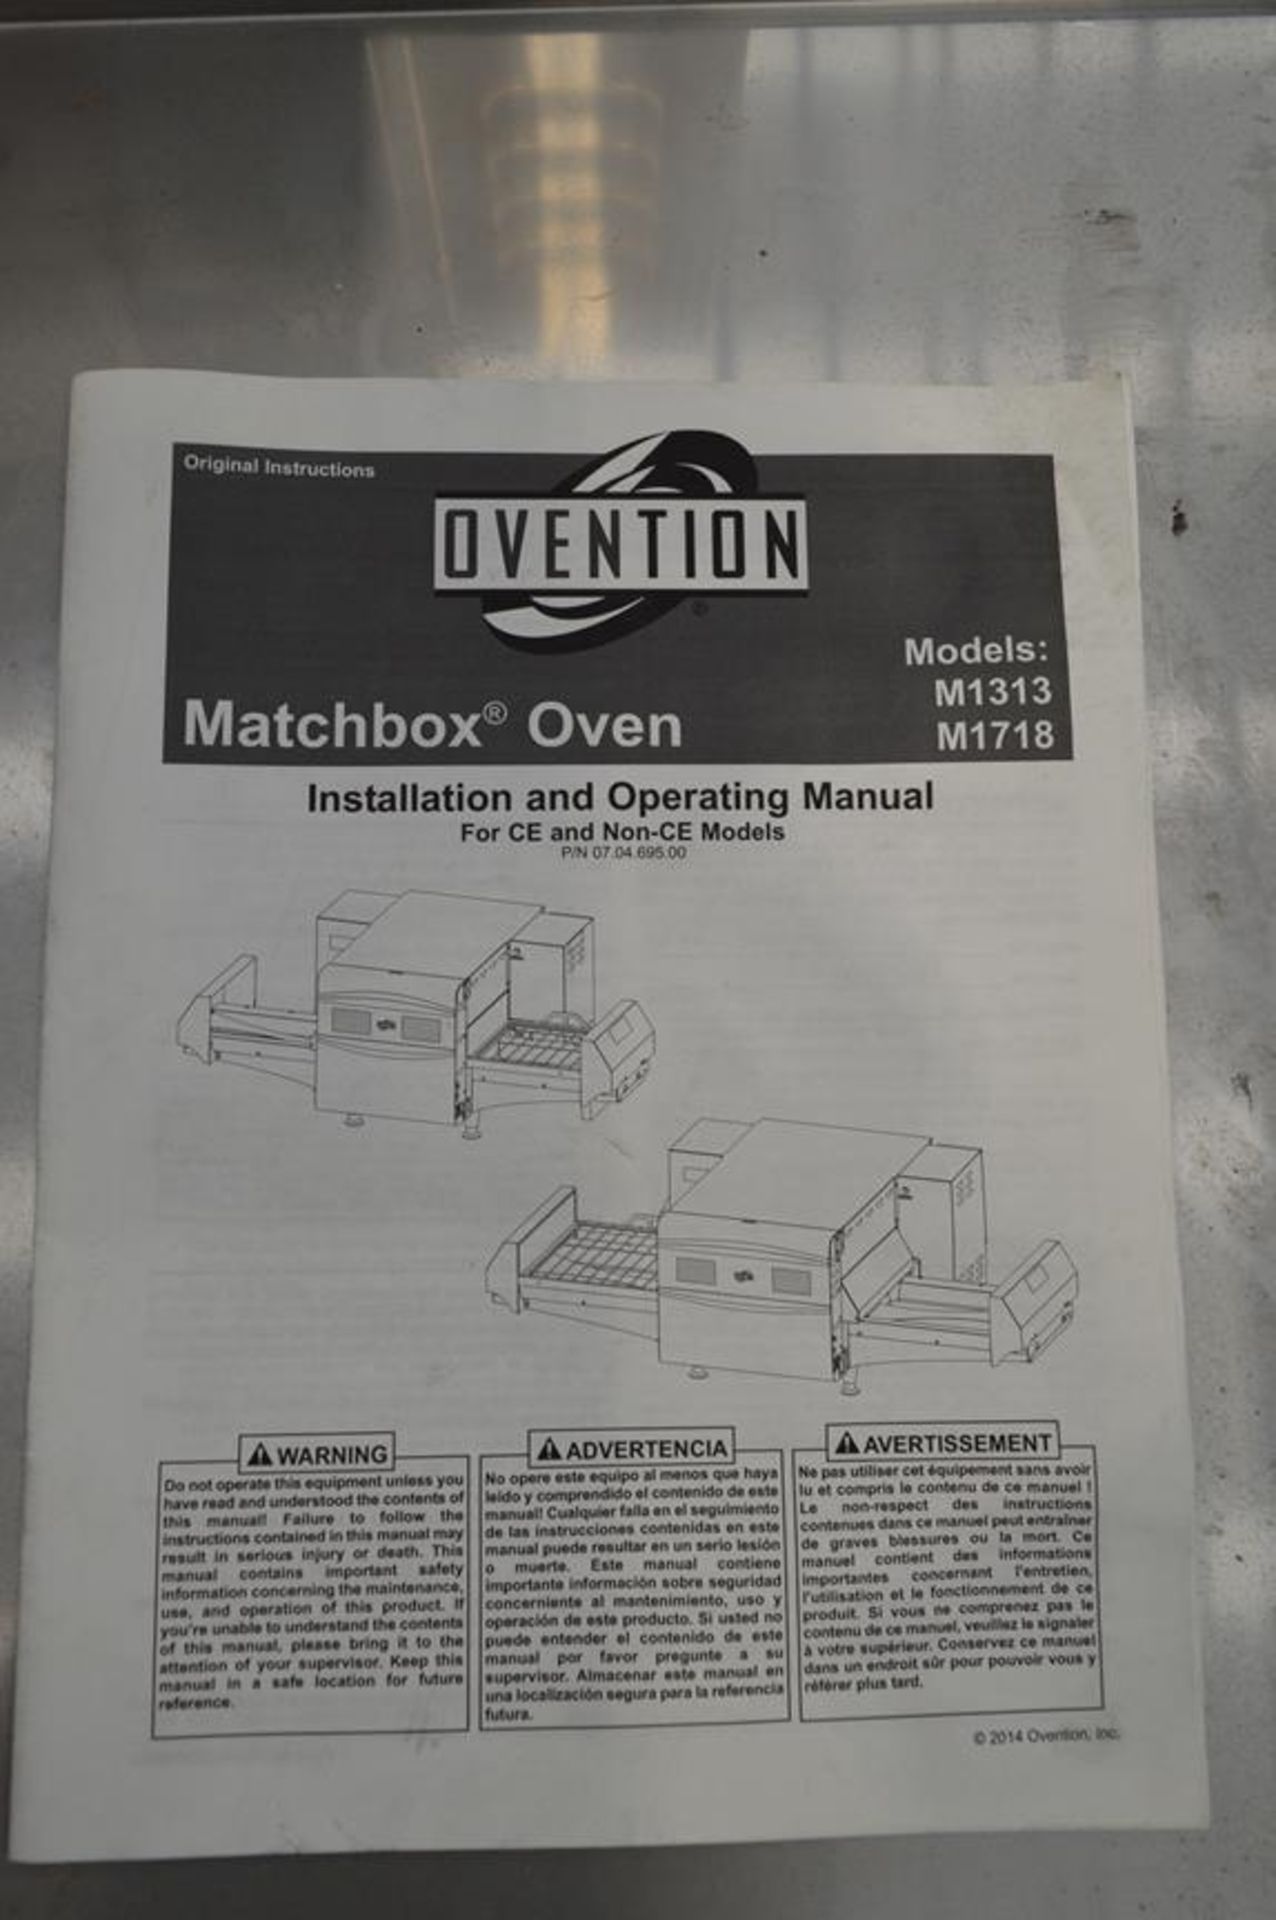 Ovention, M1718 Matchbox through feed conveyor oven, Serial No. 7361022036 - Image 7 of 7